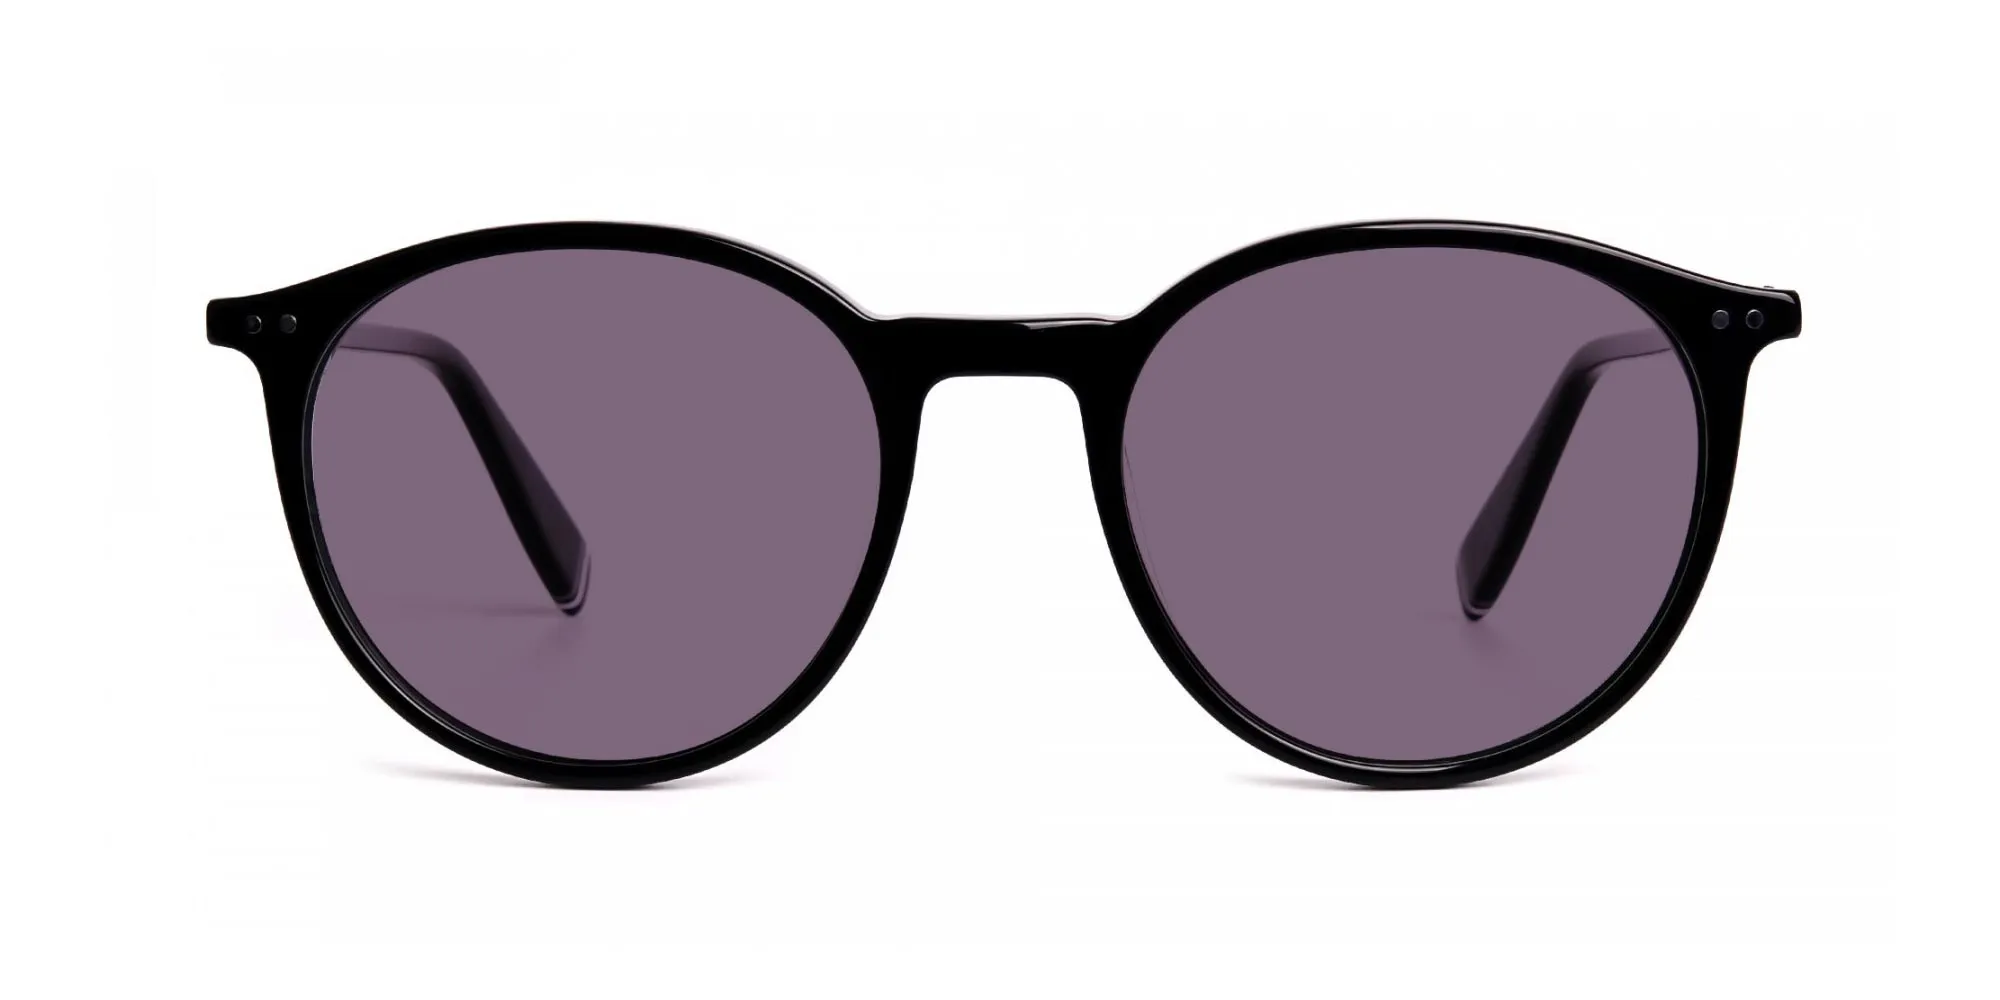 Buy Sunglasses Online at Specscart